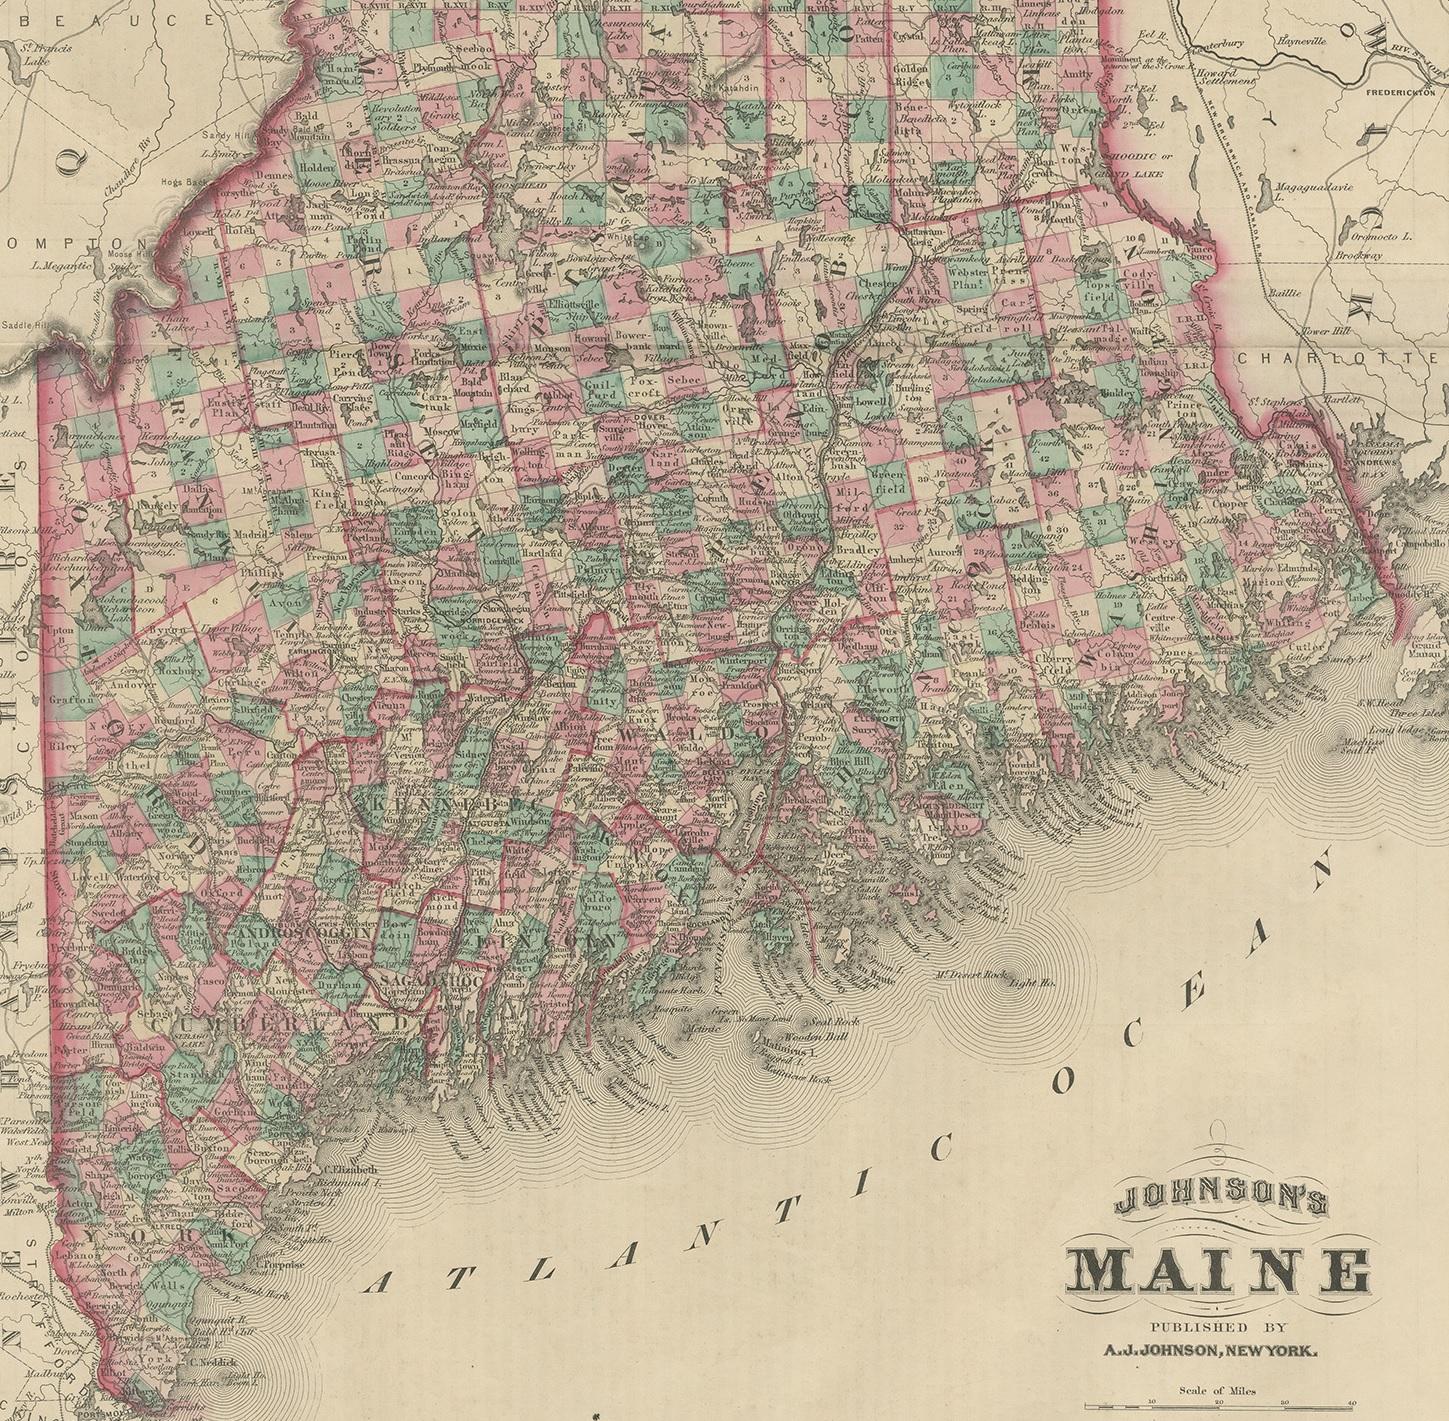 19th Century Antique Map of Maine by Johnson, 1872